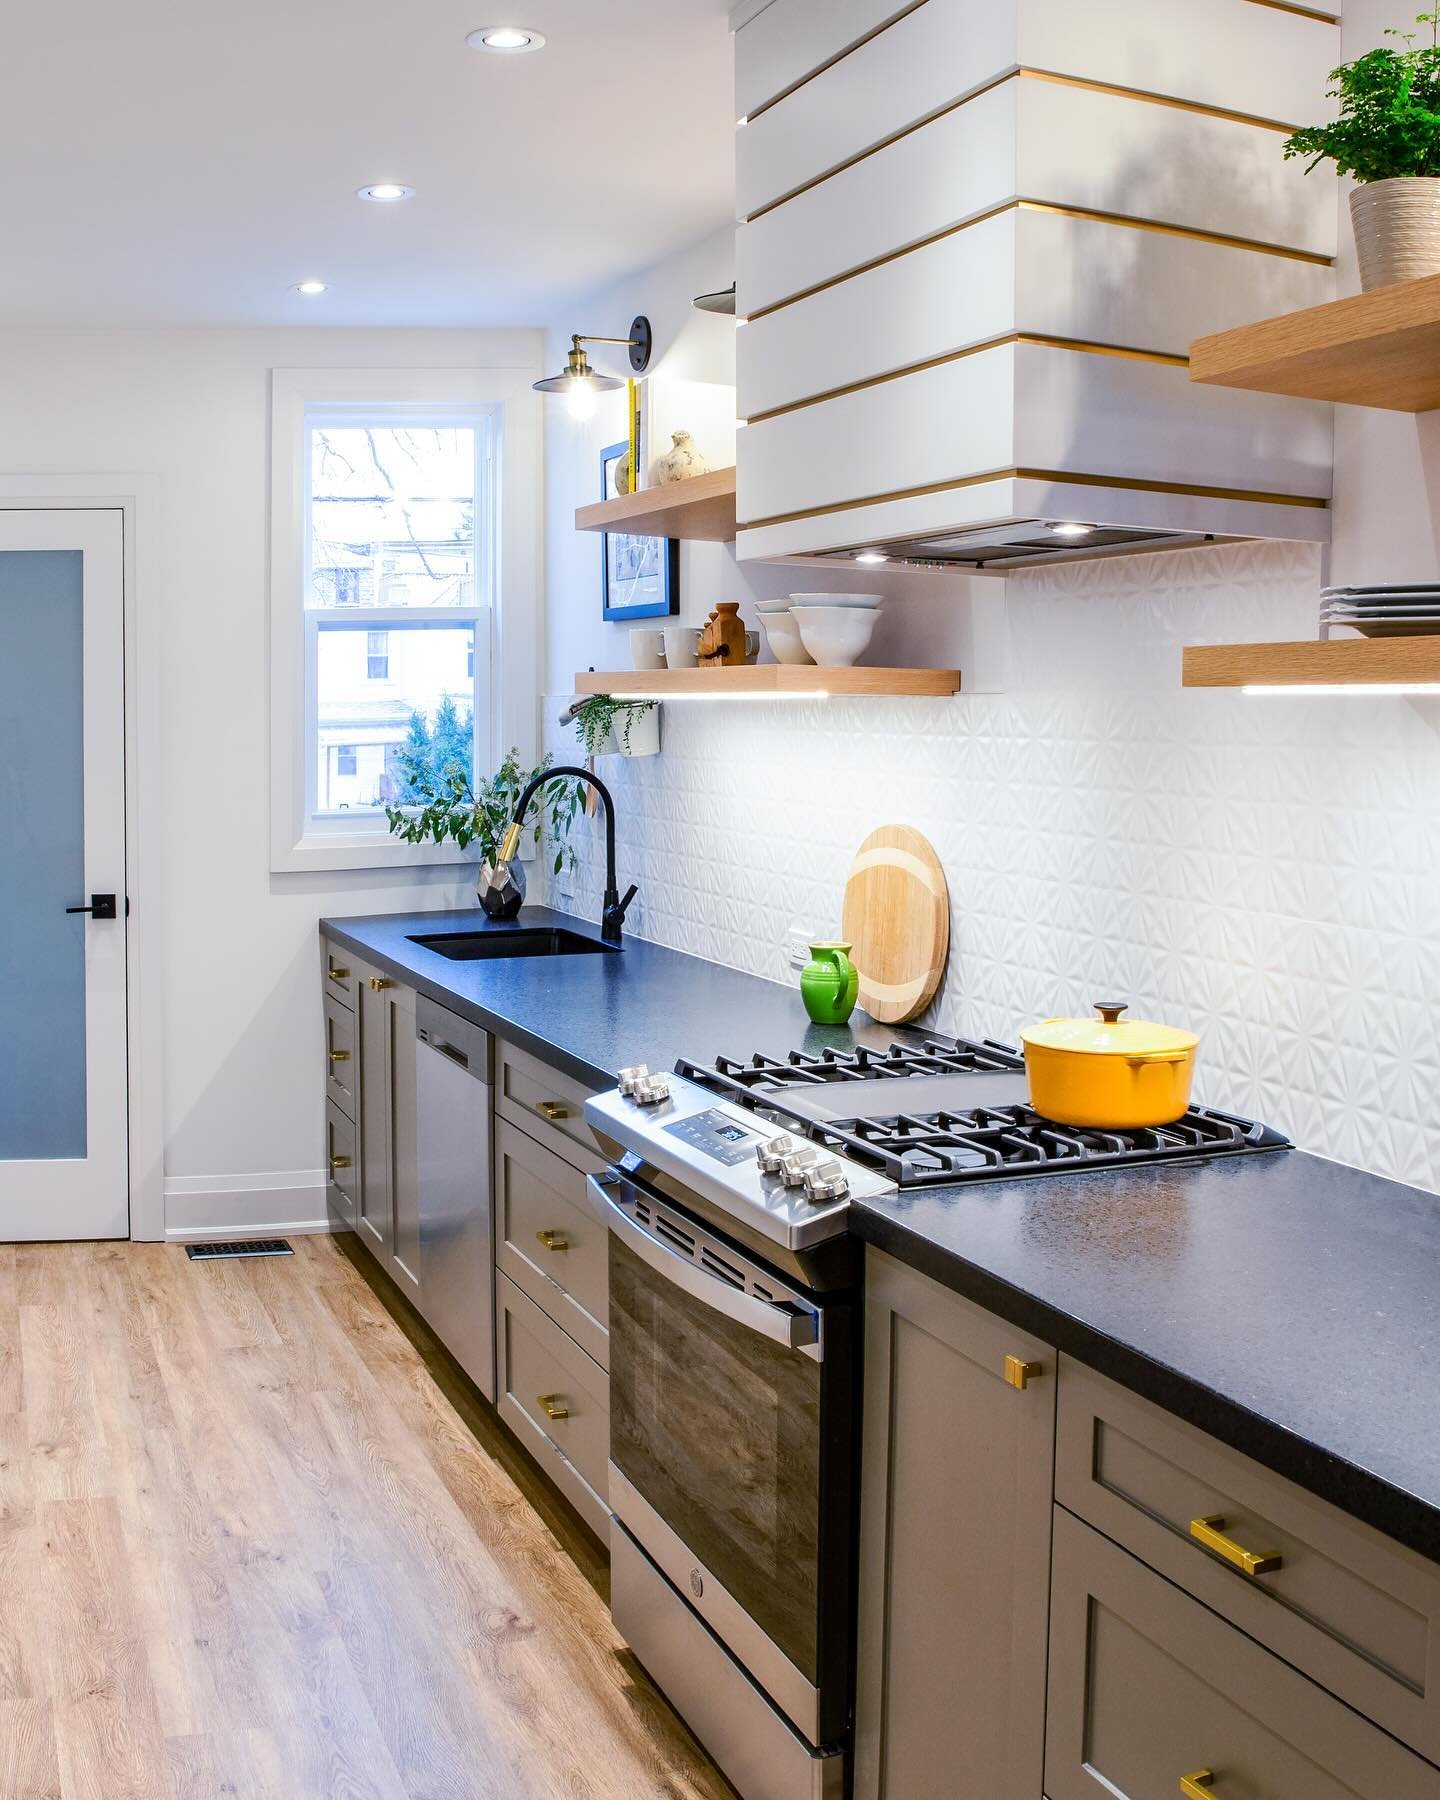 Even if your space is tight, it can be incredibly functional and beautiful at the same time.

This small Toronto kitchen doubled its storage and functionality with some careful space planning. And style? Well, swipe for the before and tell me what yo